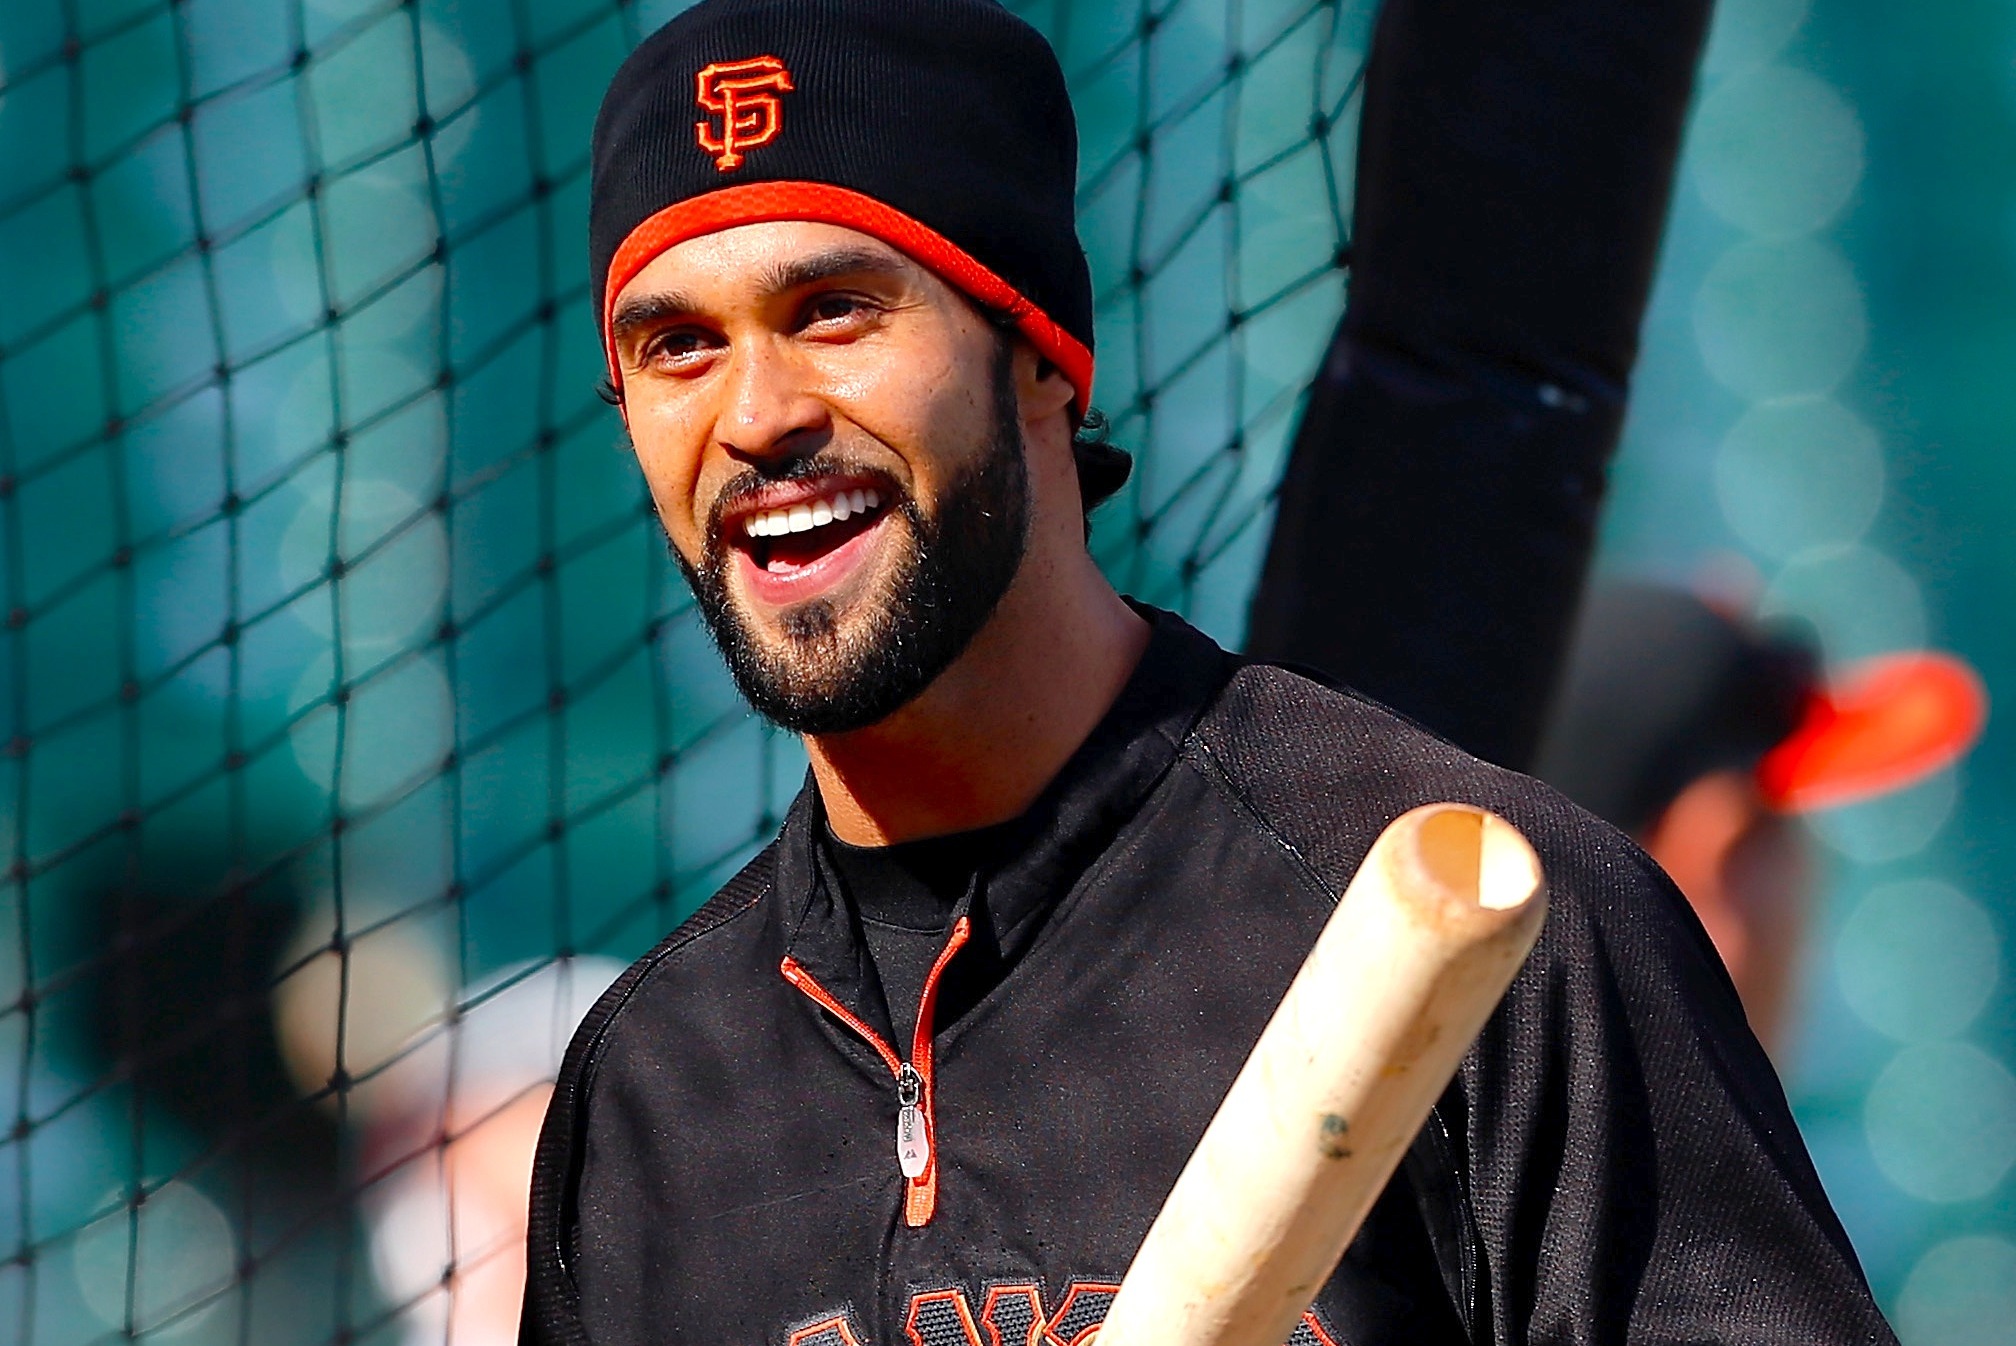 Giants notes: Angel Pagan wants “the respect that I deserve